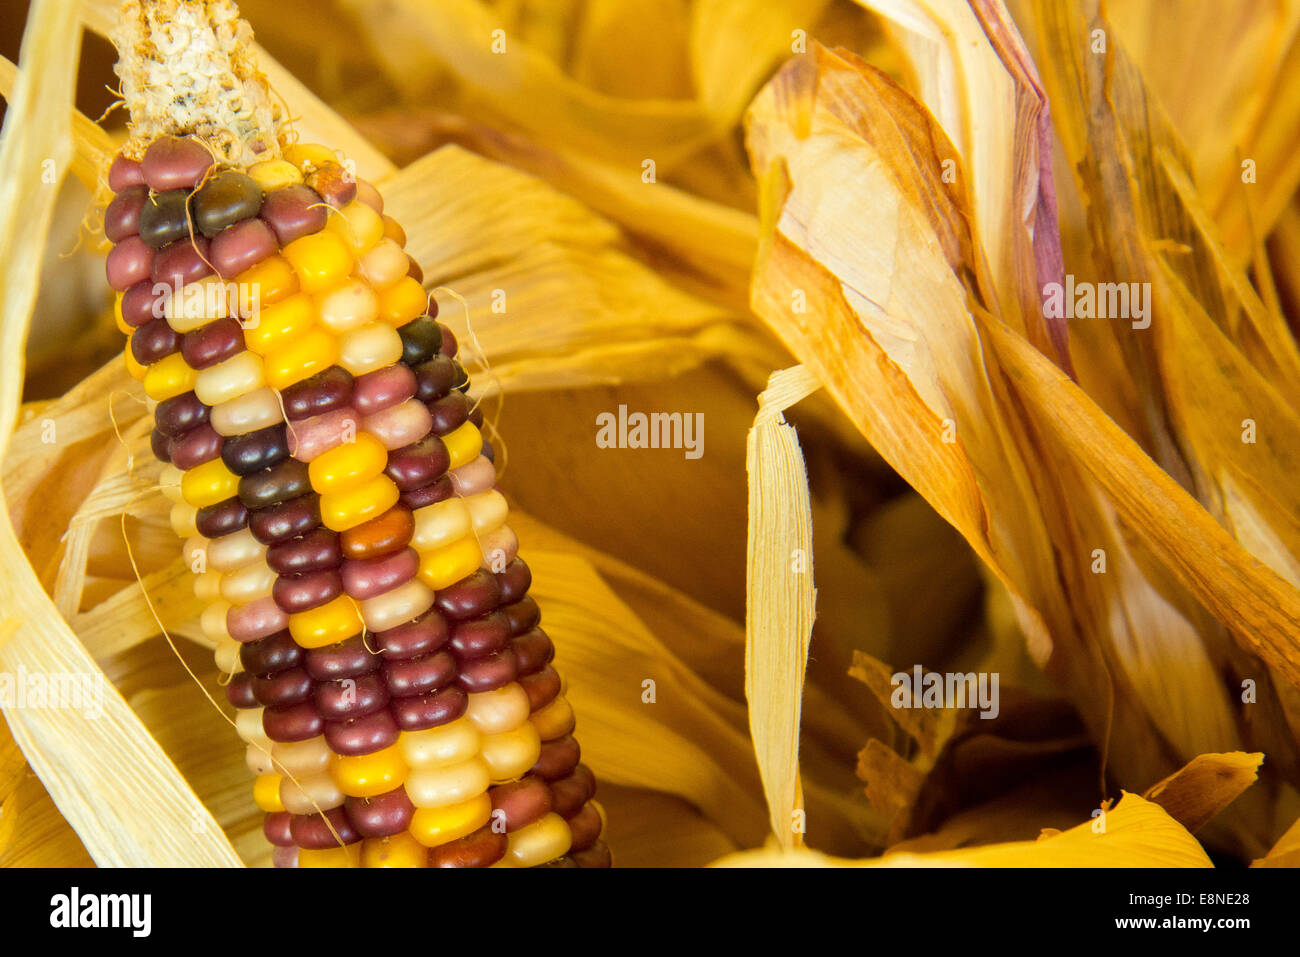 wild multi-colored corn fresh picked from the garden Stock Photo